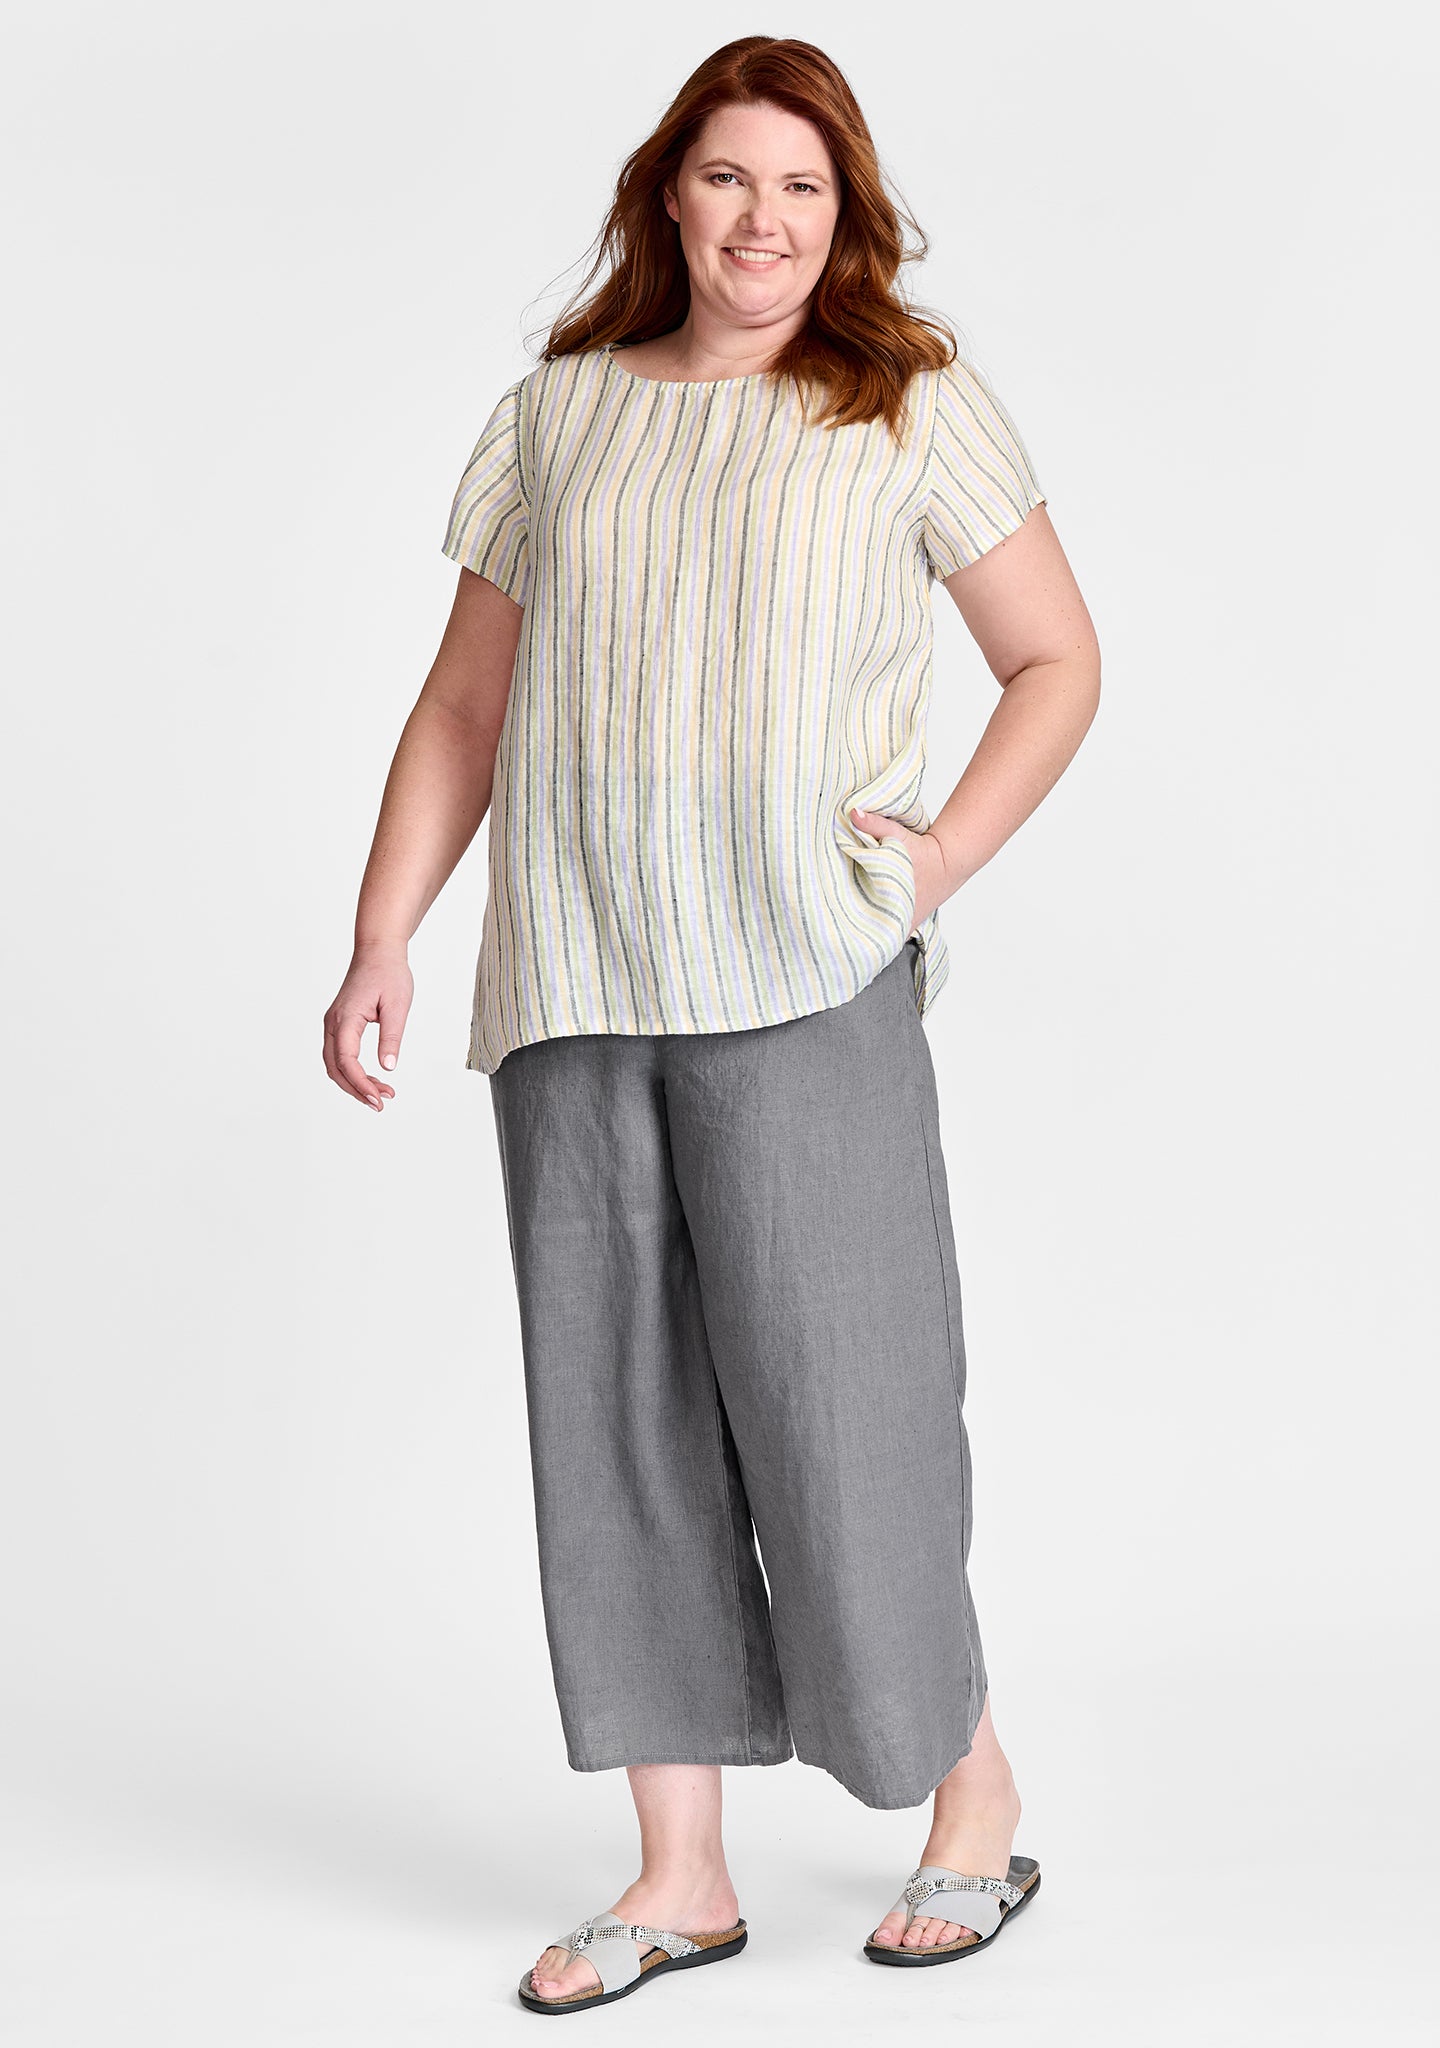 FLAX linen shirt in stripes with linen pants in grey